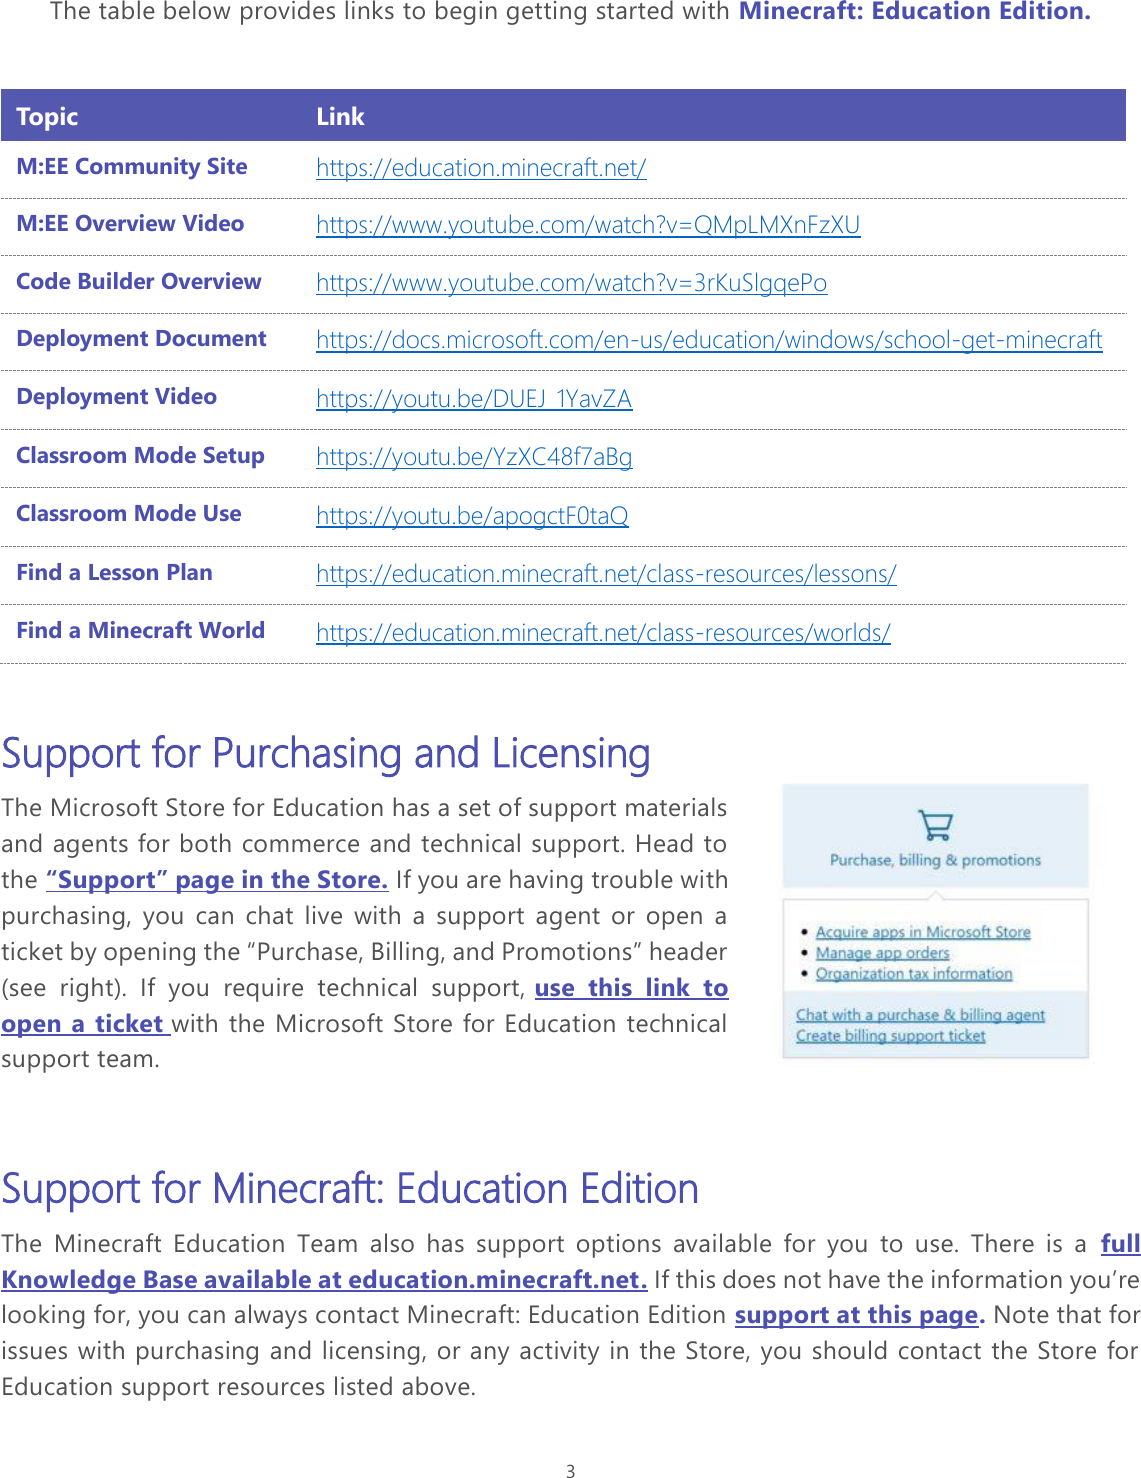 Page 3 of 11 - Microsoft Teams Team Leader Getting Started Guide MEE Educator Deployment